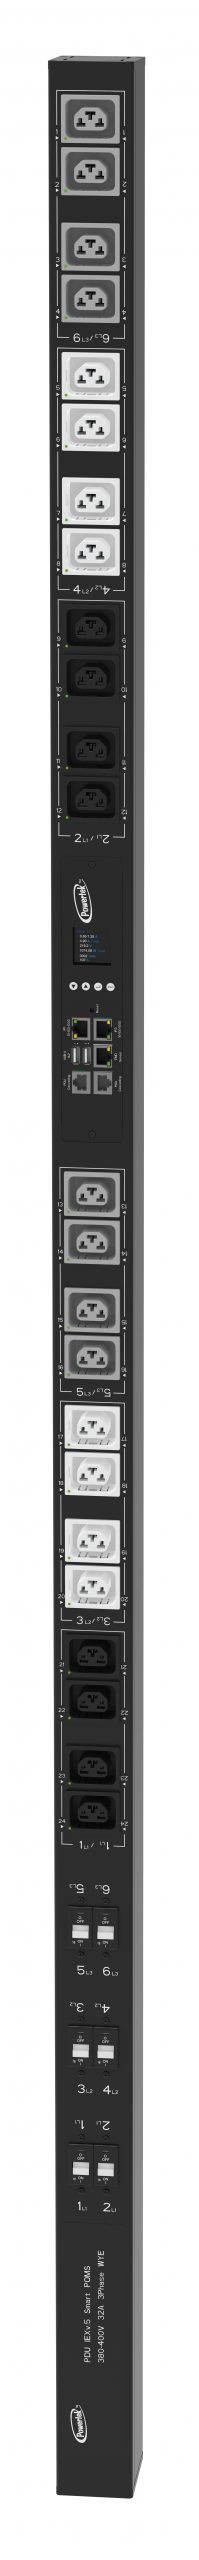 IPDU Per Inlet Monitored Metered Intelligent Power Distribution with remote internet access for information per inlet